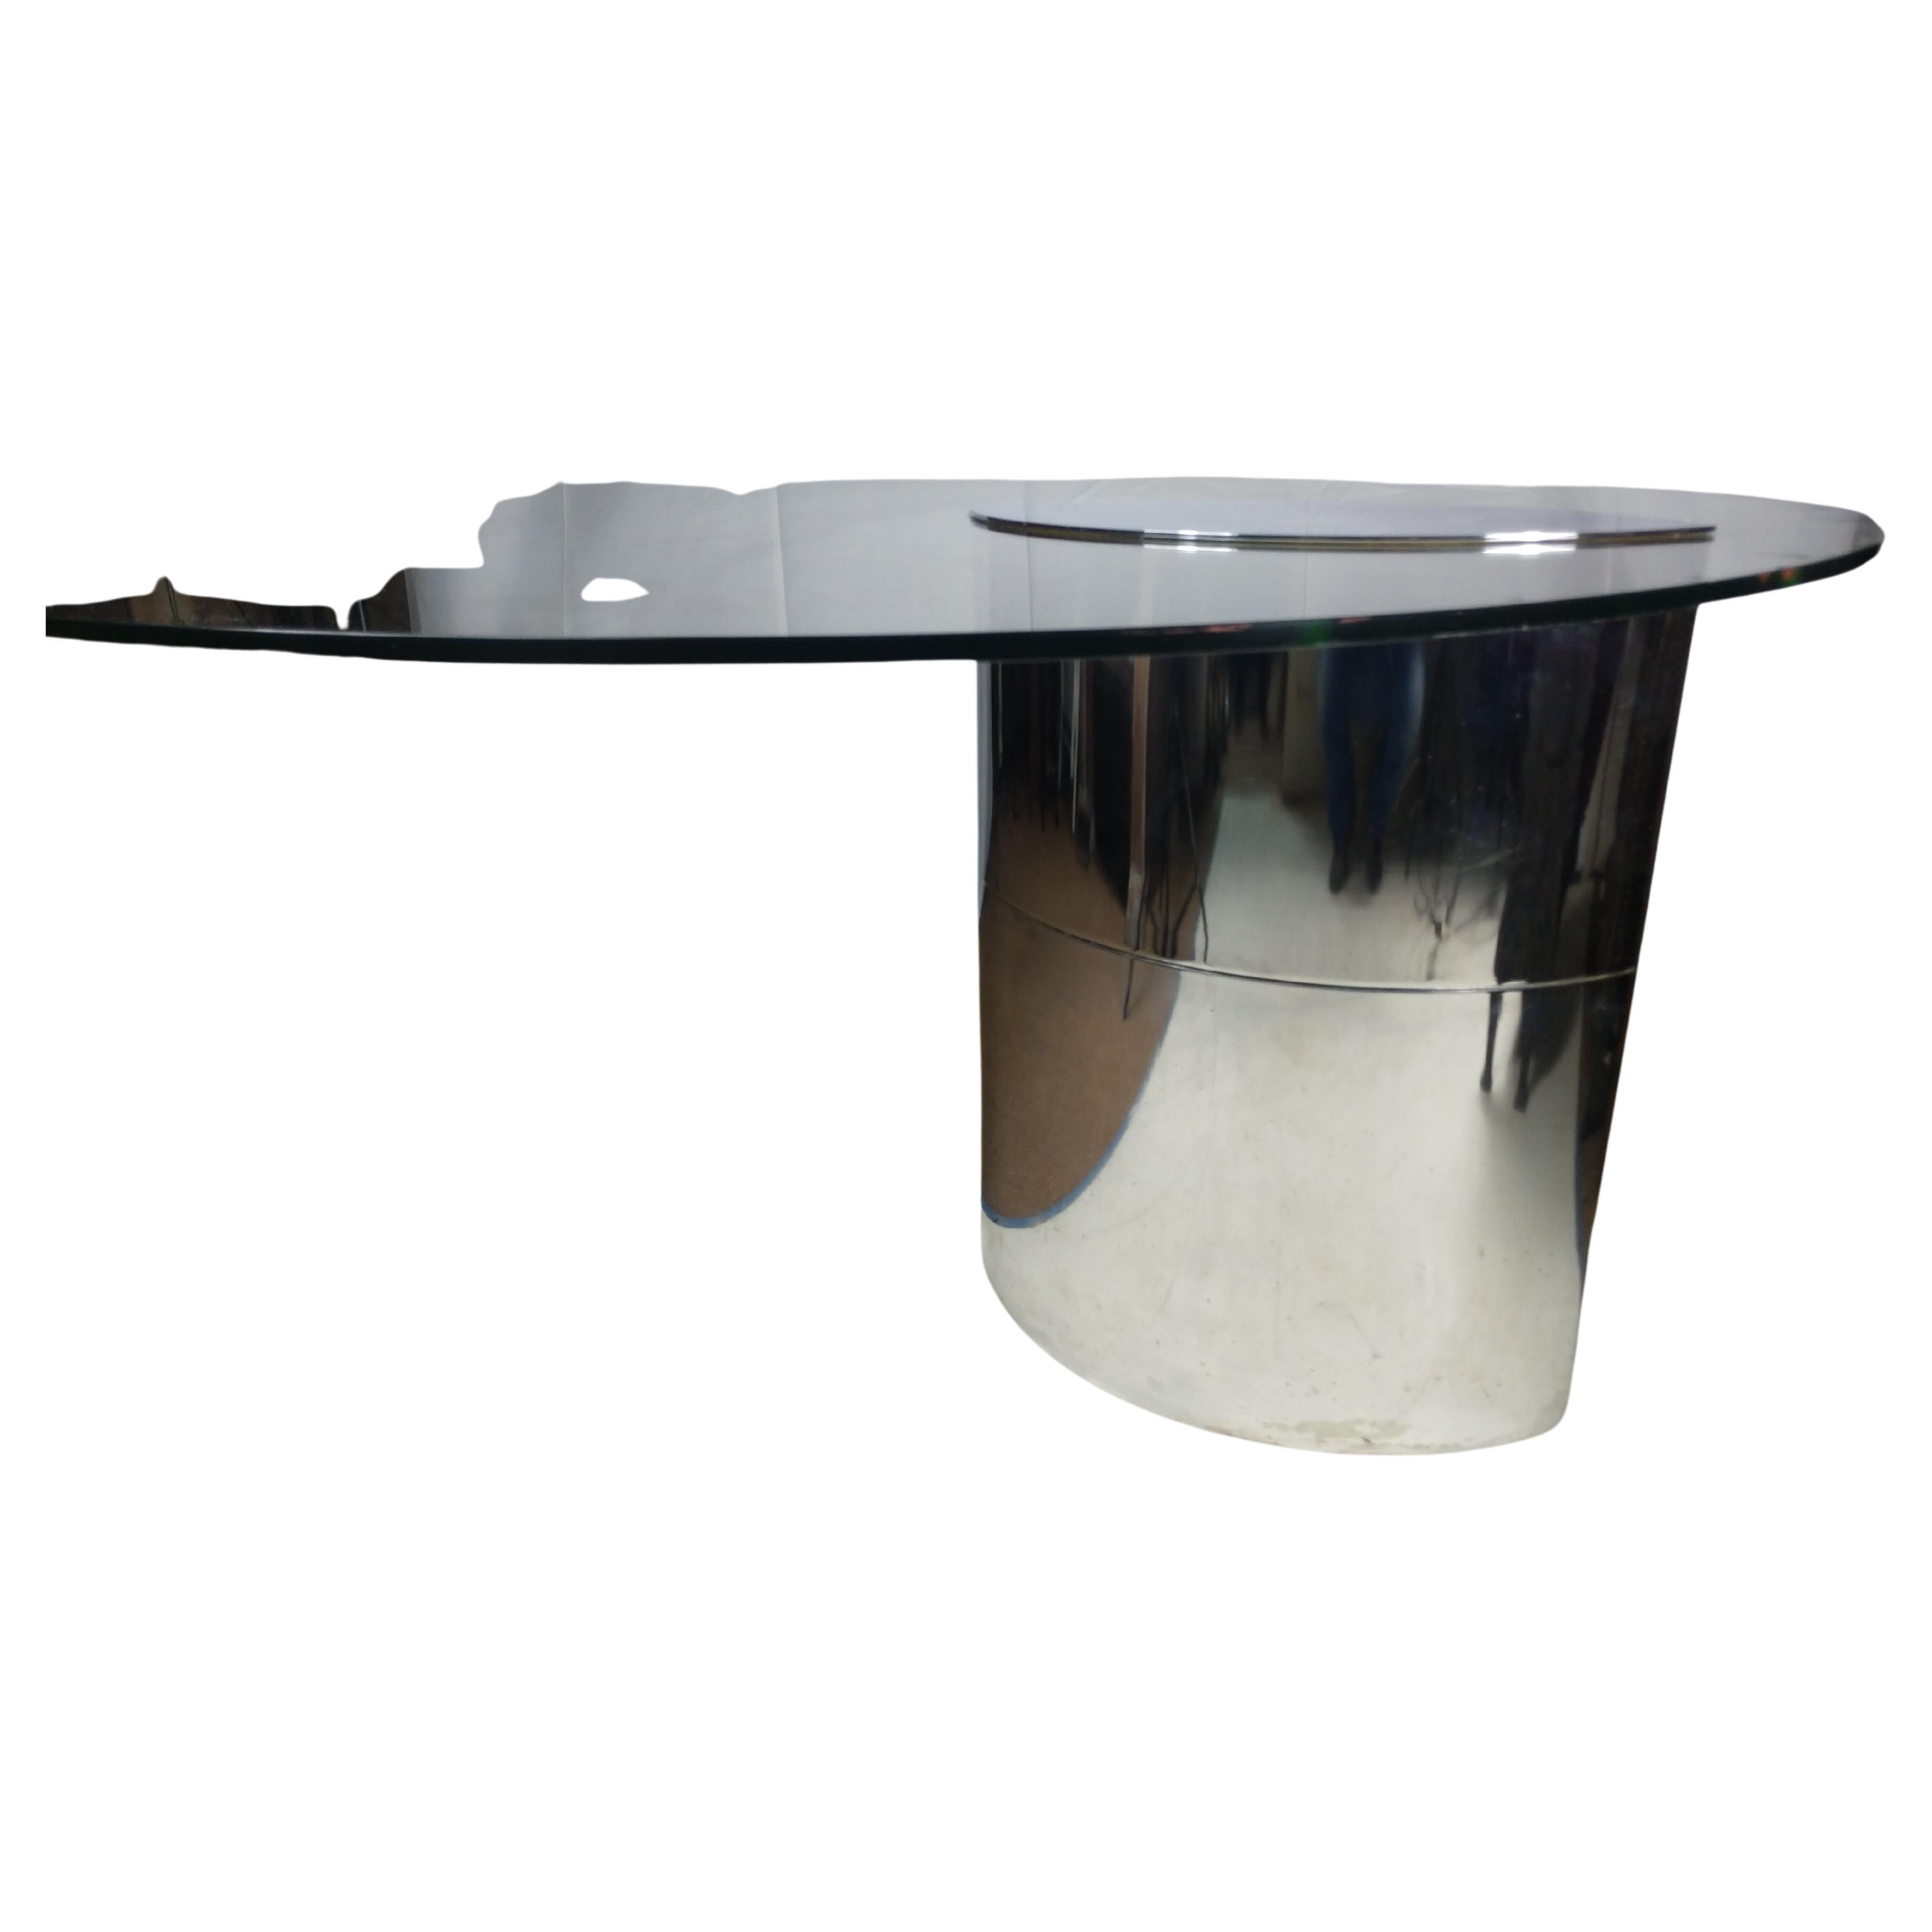 Fabulous round 59 inch diameter glass top table which sits cantilevered on a stainless steel base. Internally locked on and with 5 heavy duty weights to counter balance the table. Stainless steel is in 2 sections, one section, the top sits inside